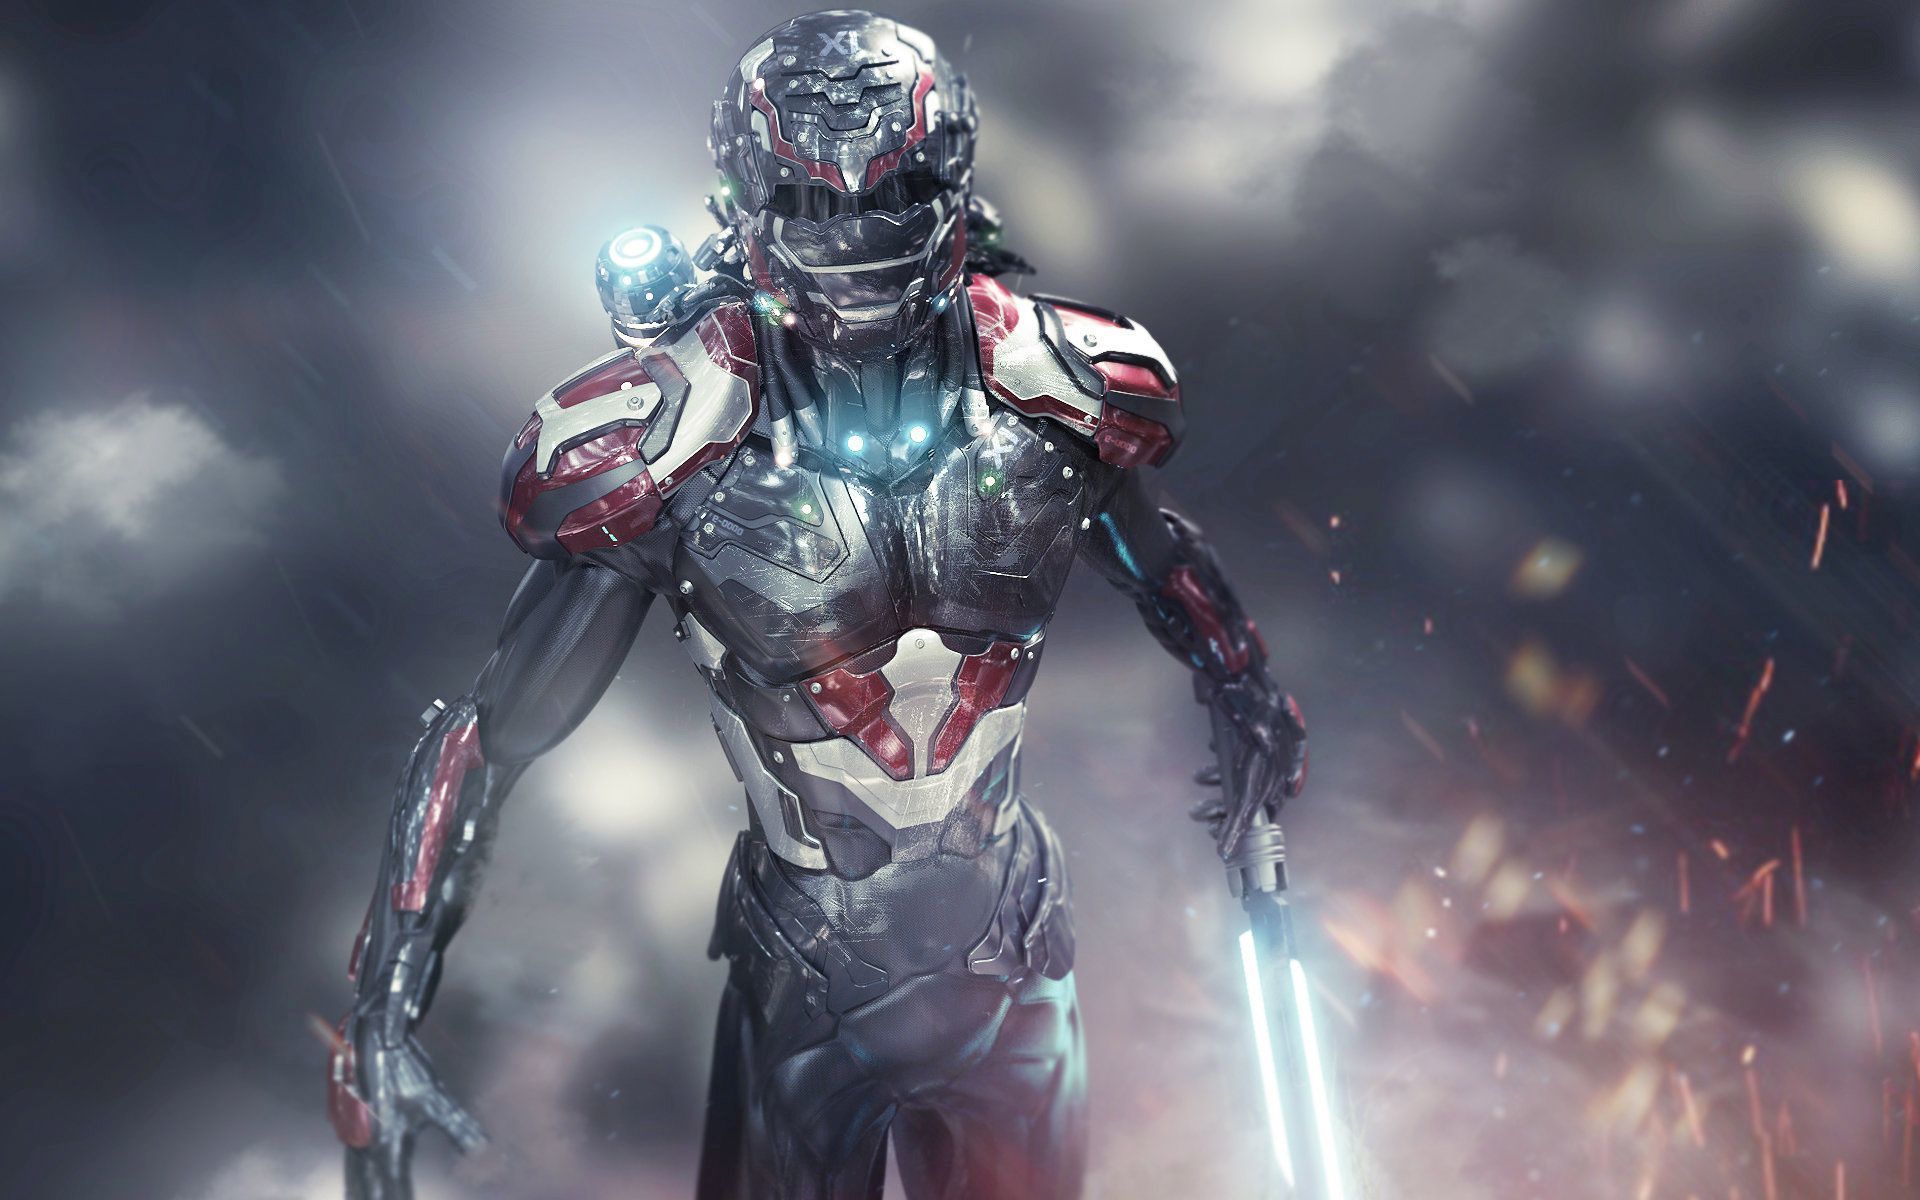 Cool Cyborg Fighter Wallpapers